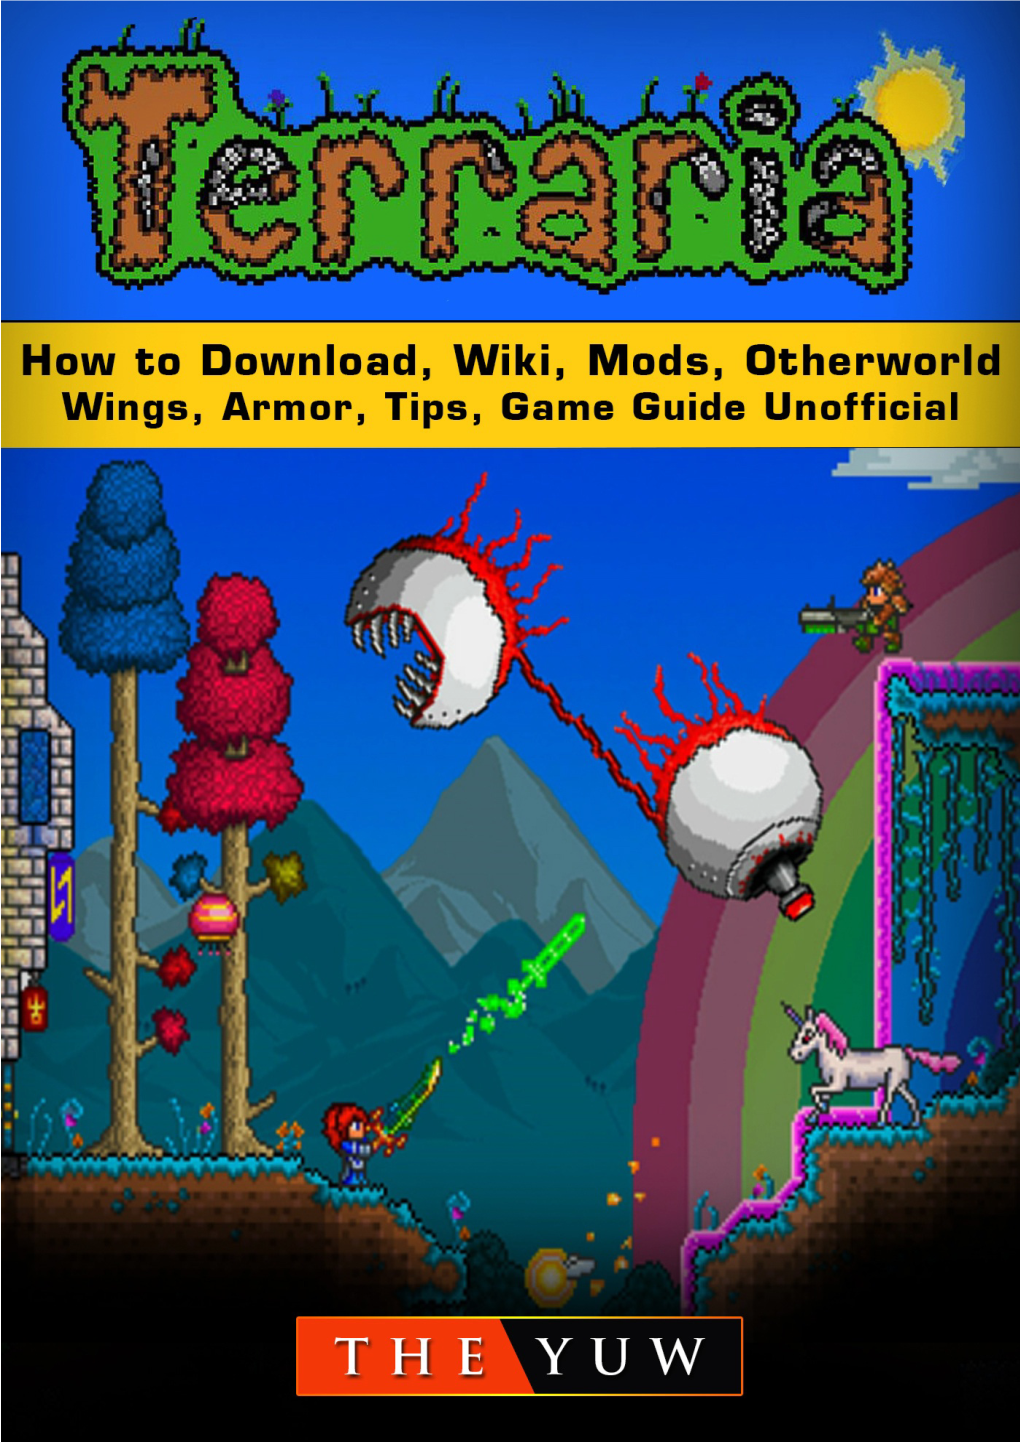 Terraria How to Download, Wiki, Mods, Otherworld, Wings, Armor, Tips, Game Guide Unofficial